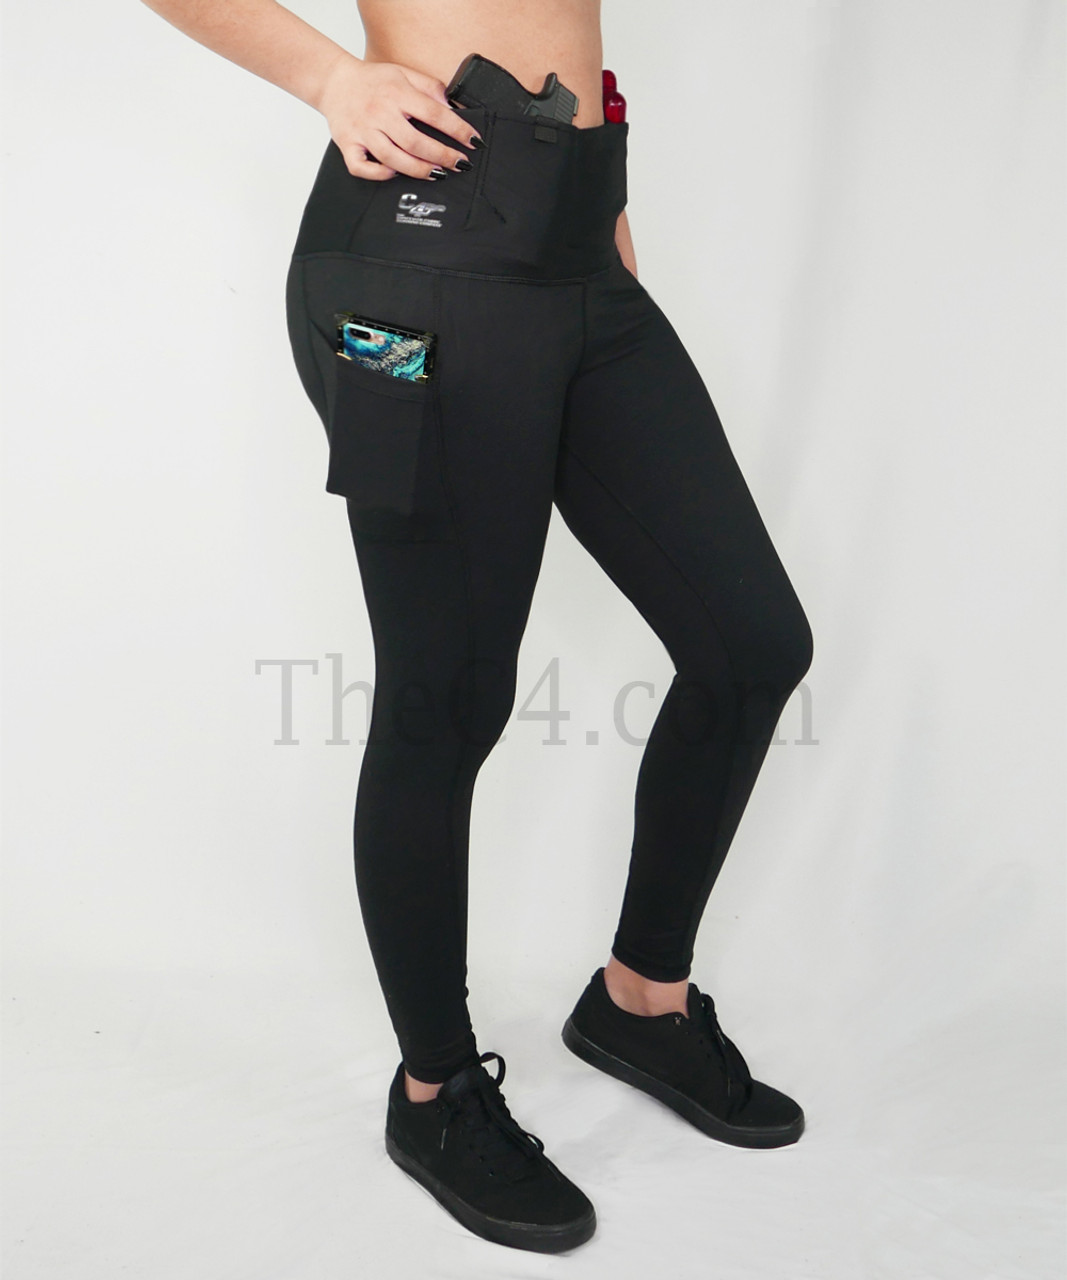 Concealed Carry Leggings With Pockets - Black